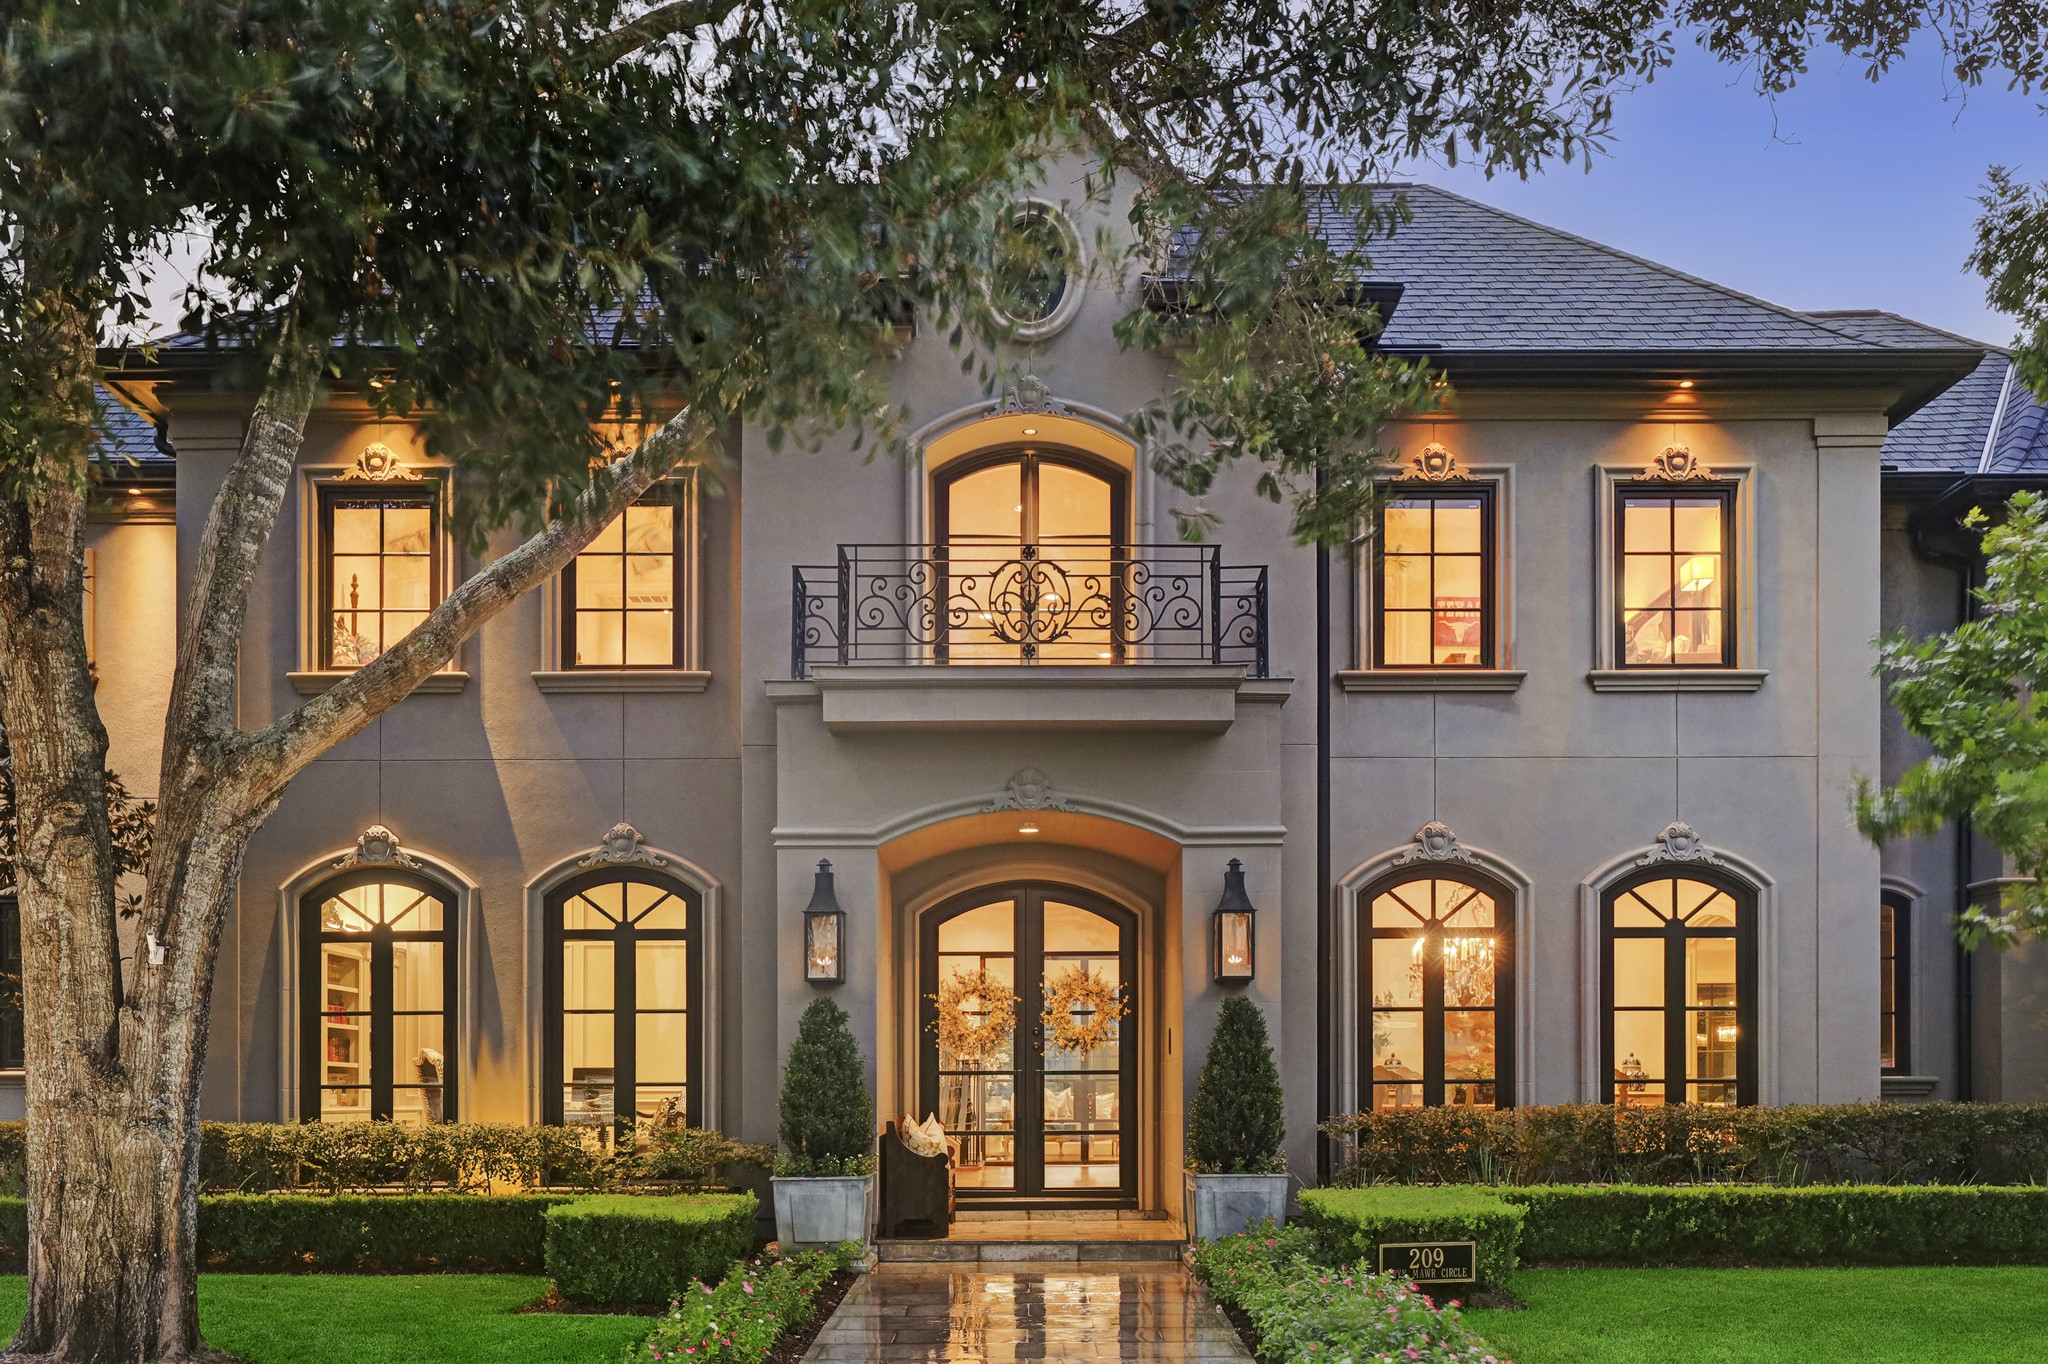 The symmetrical designed elevation and beautifully manicured grounds boasts an impressive curb appeal.